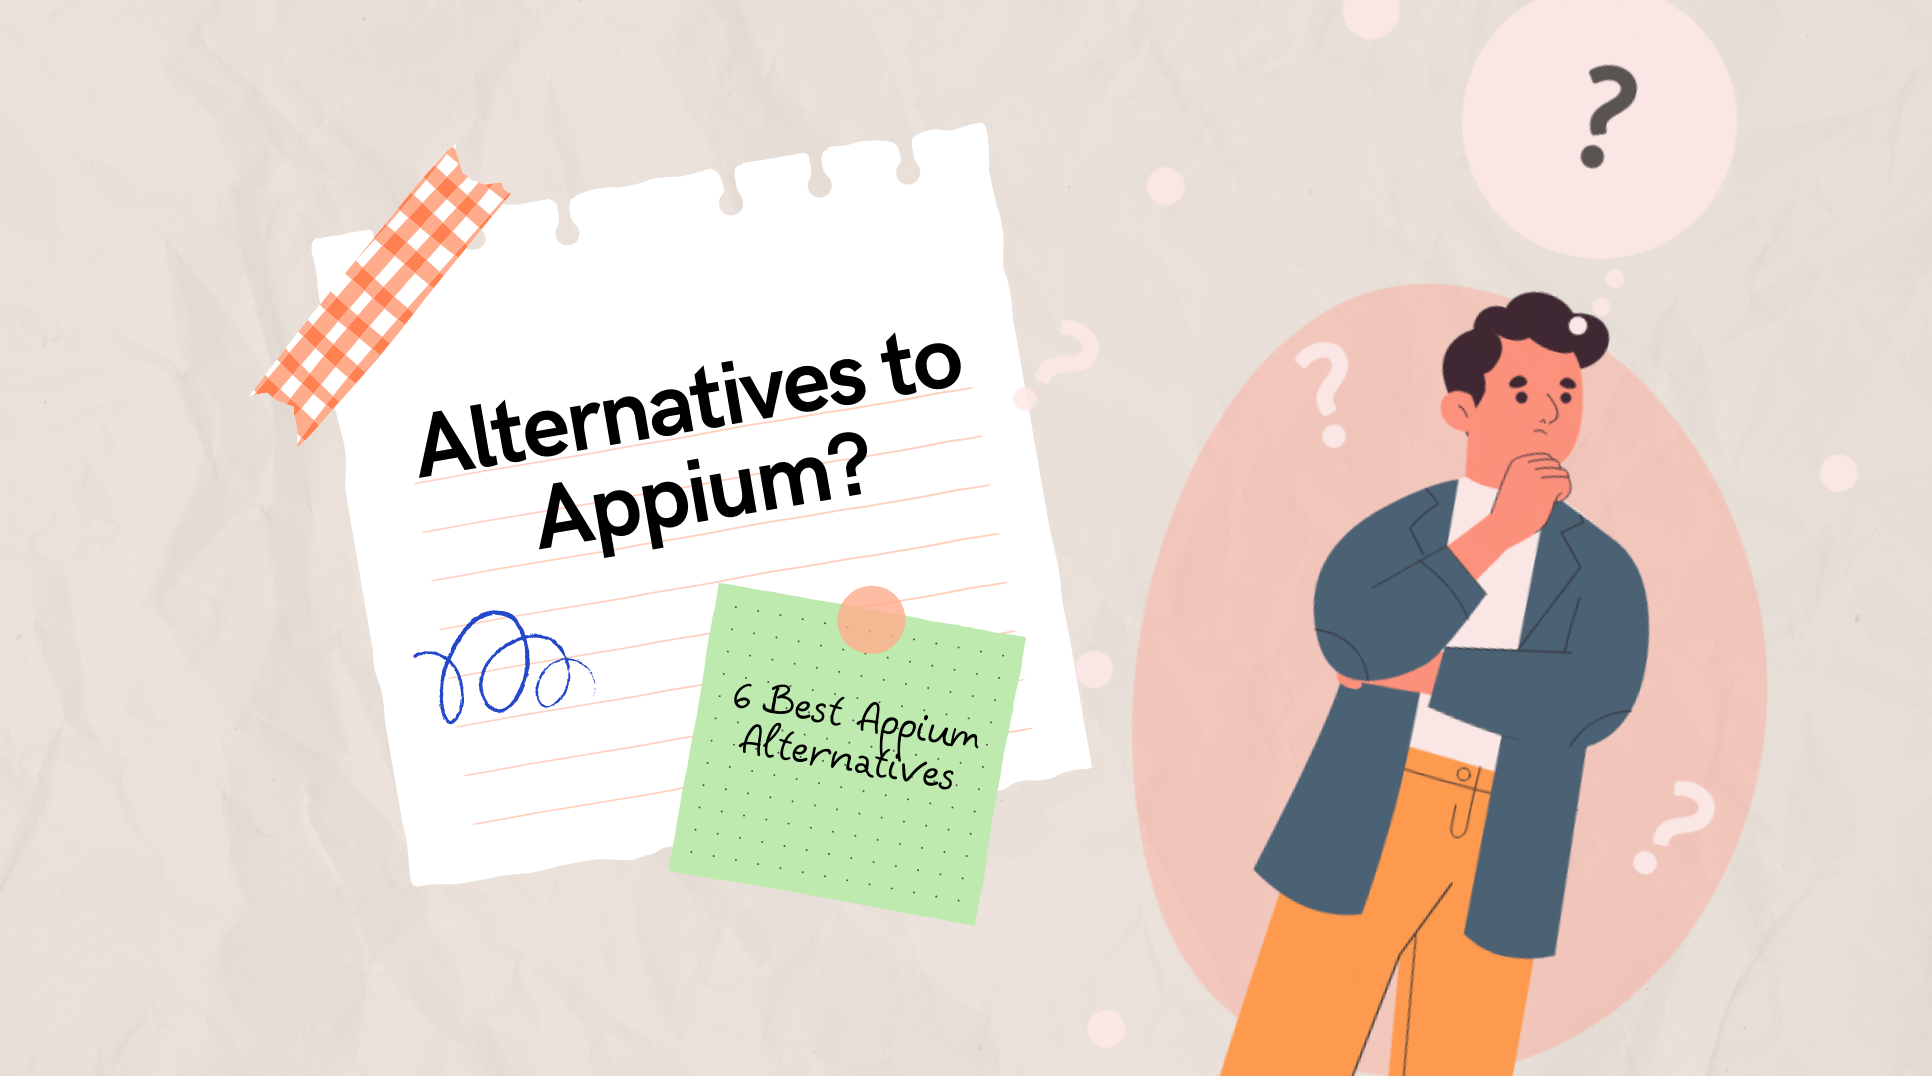 We Used 6 Best Appium Alternatives for 2 Weeks - Here's What We Found